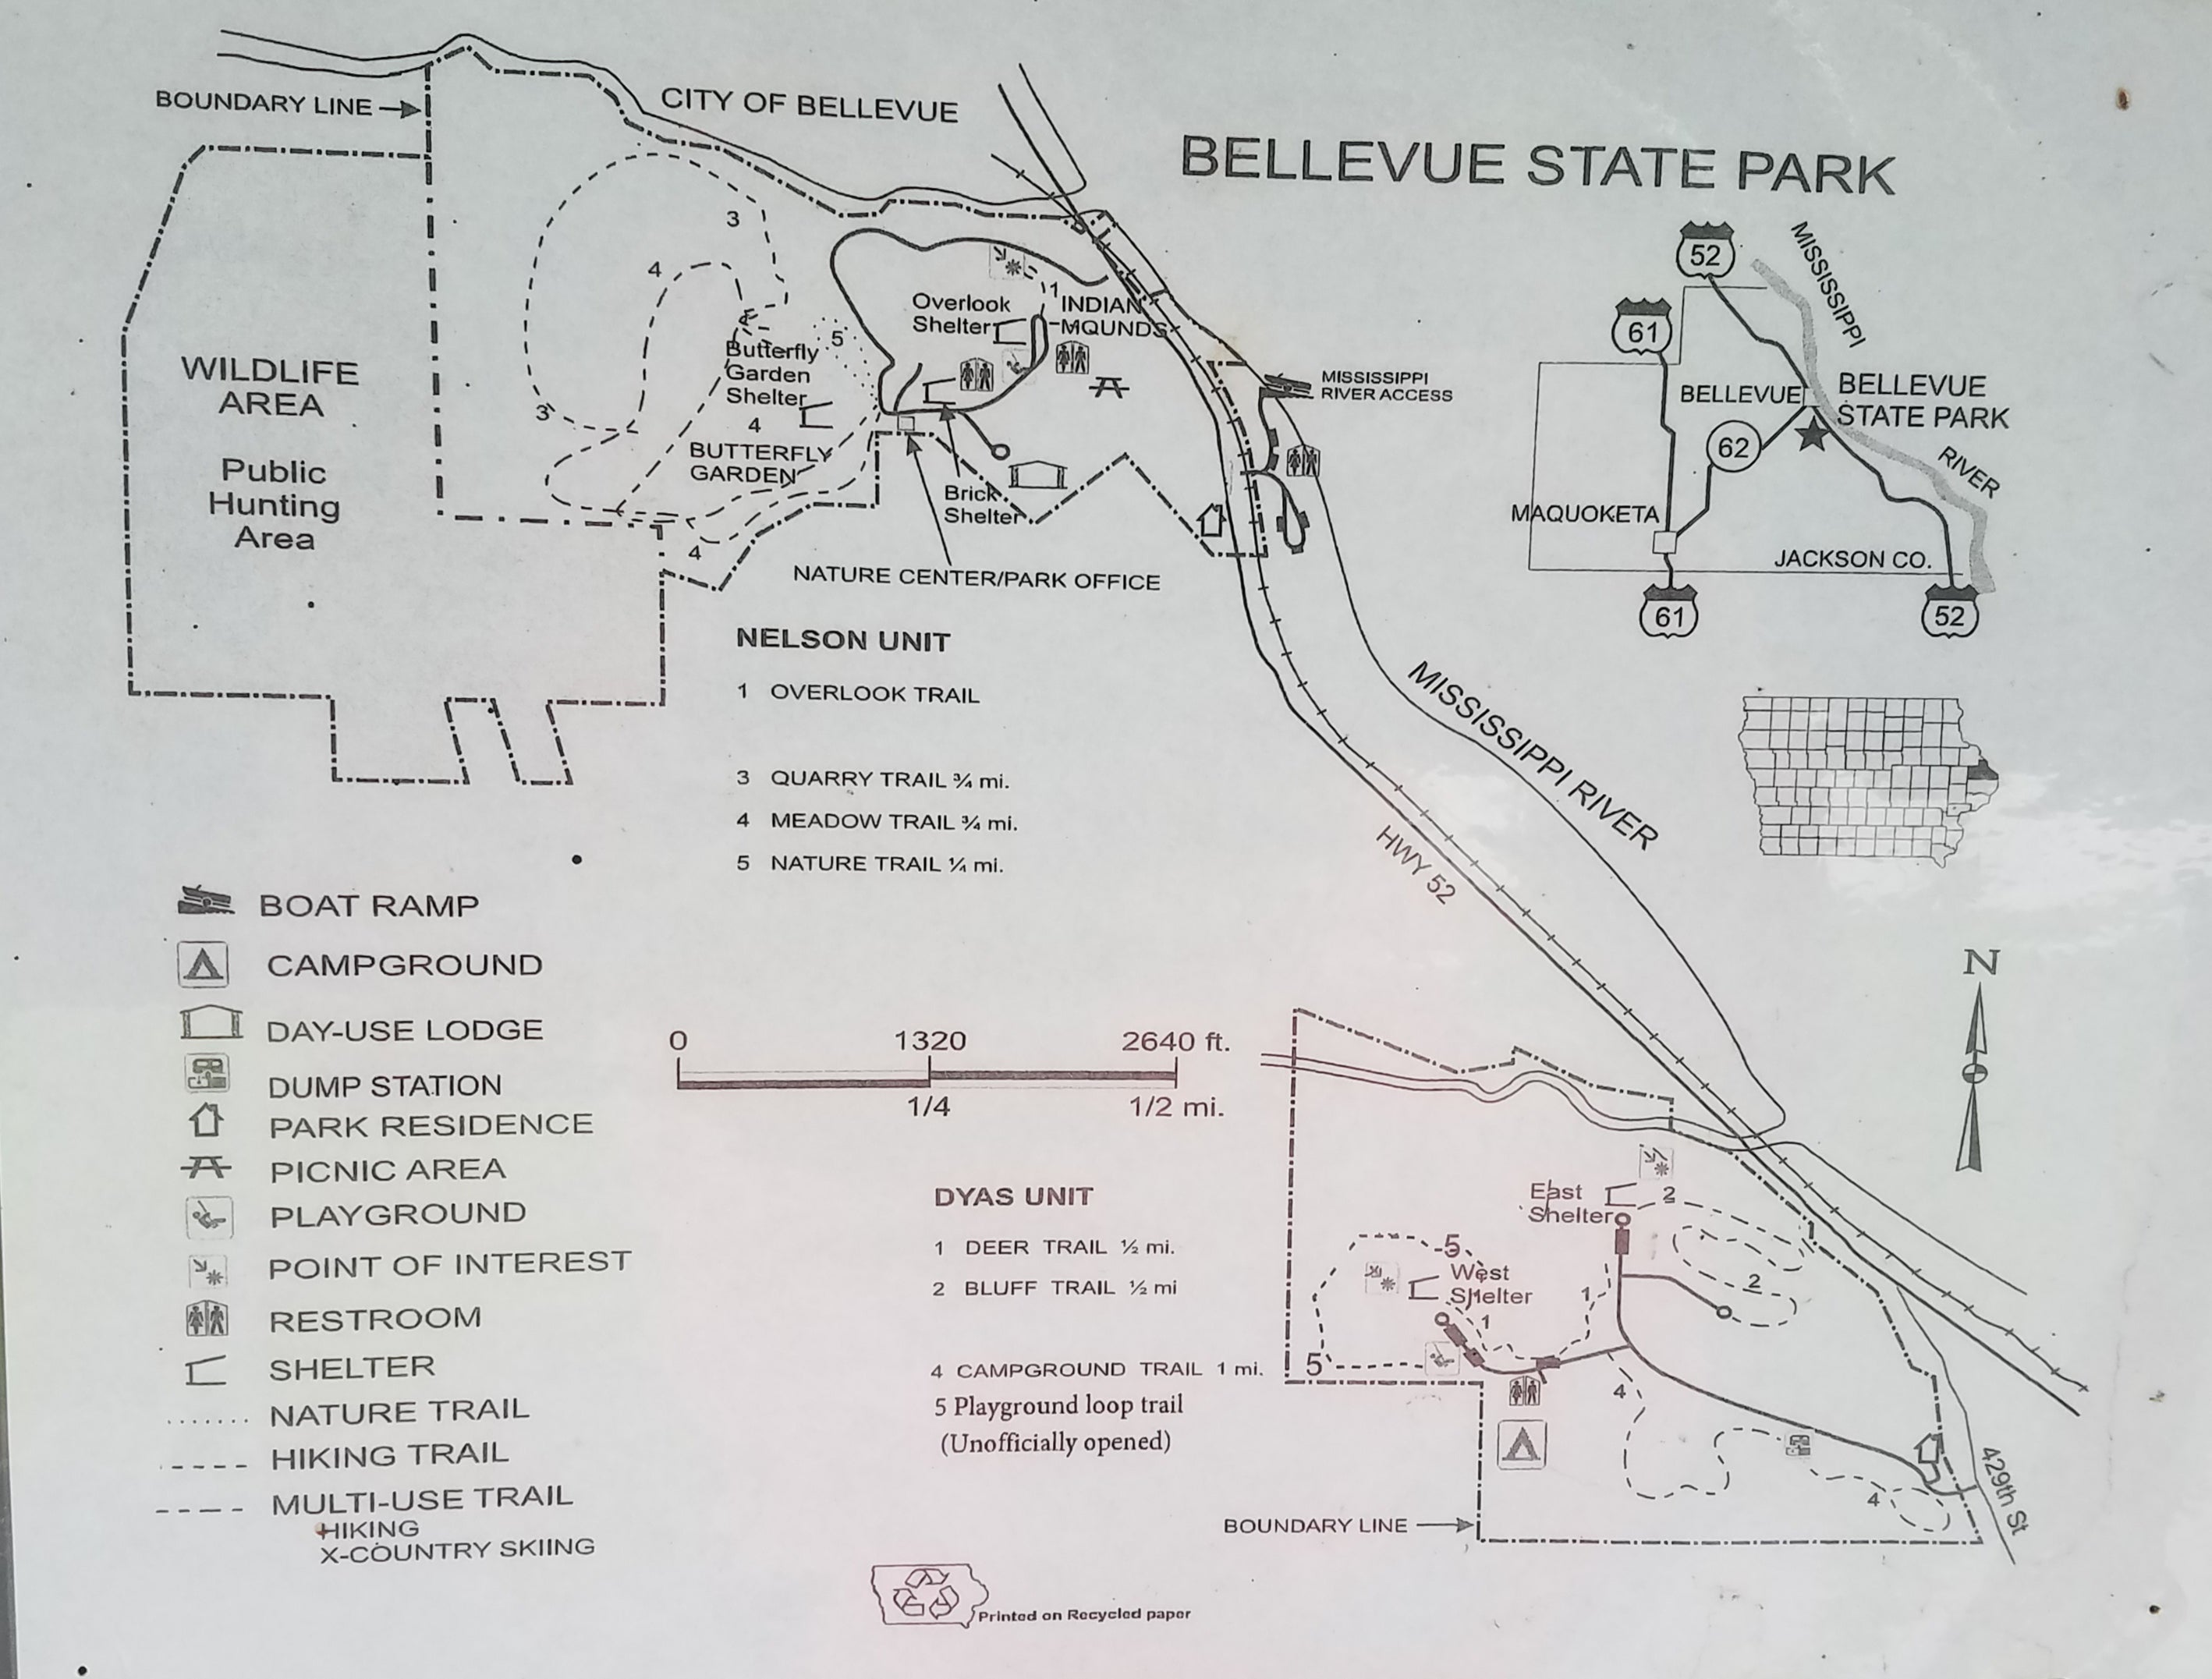 Bellevue SP includes Dyas, which isthe camping area, and Nelson. Nelson has a butterfly garden and some trails.